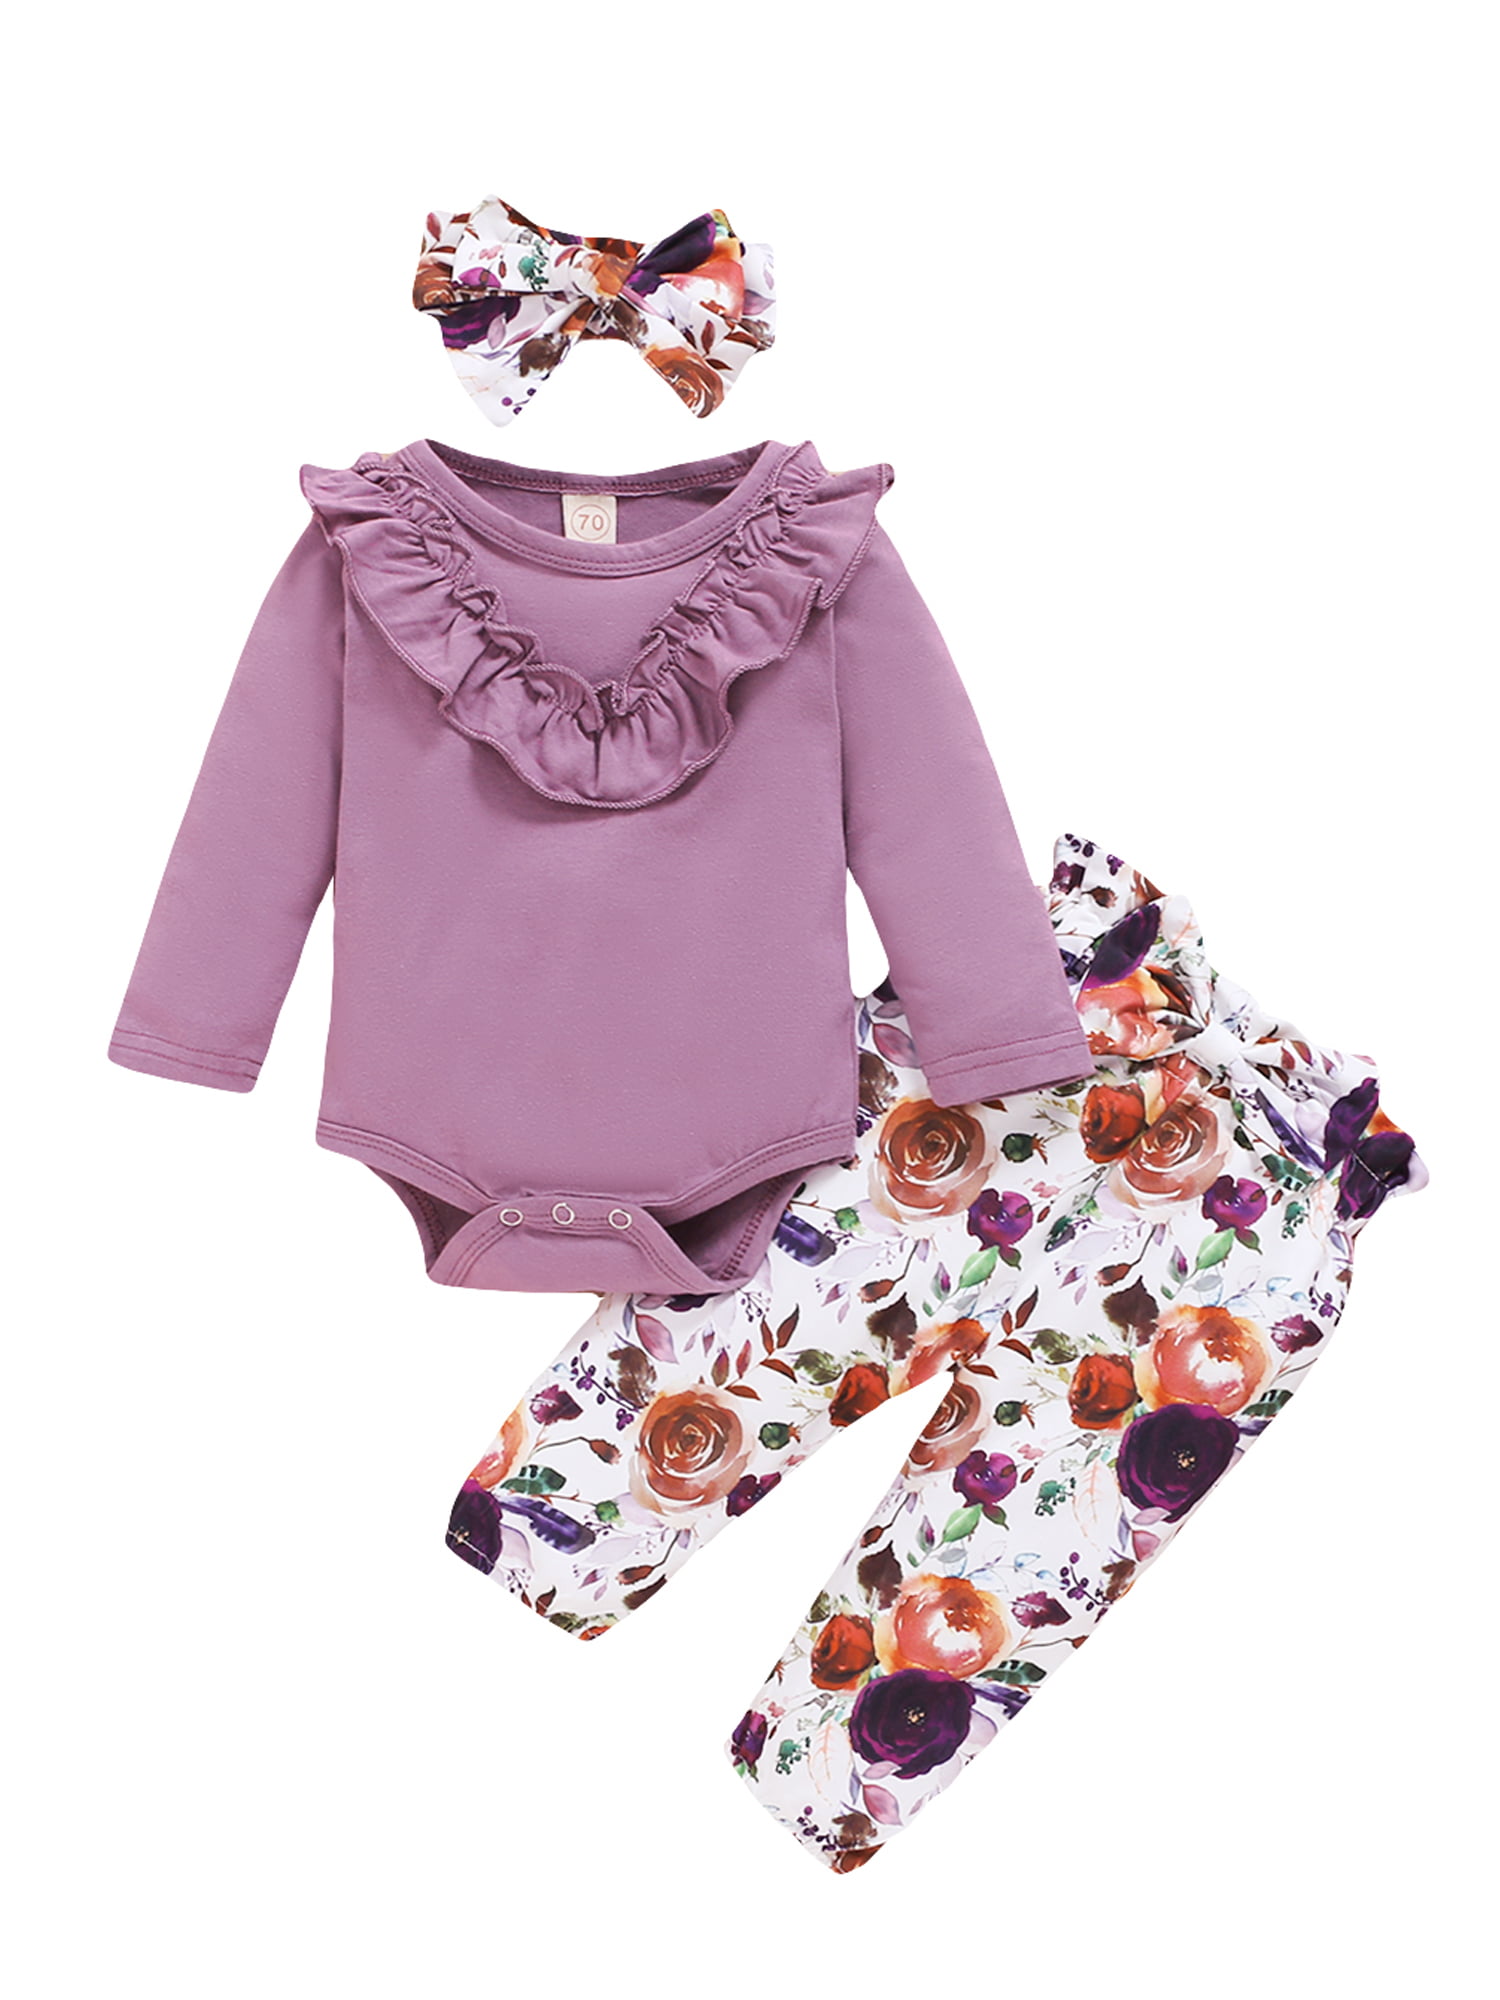 Details about   Infant Baby Boys Girls Floral Print Pullover Hoodie Top+Pant+Headband Outfits US 